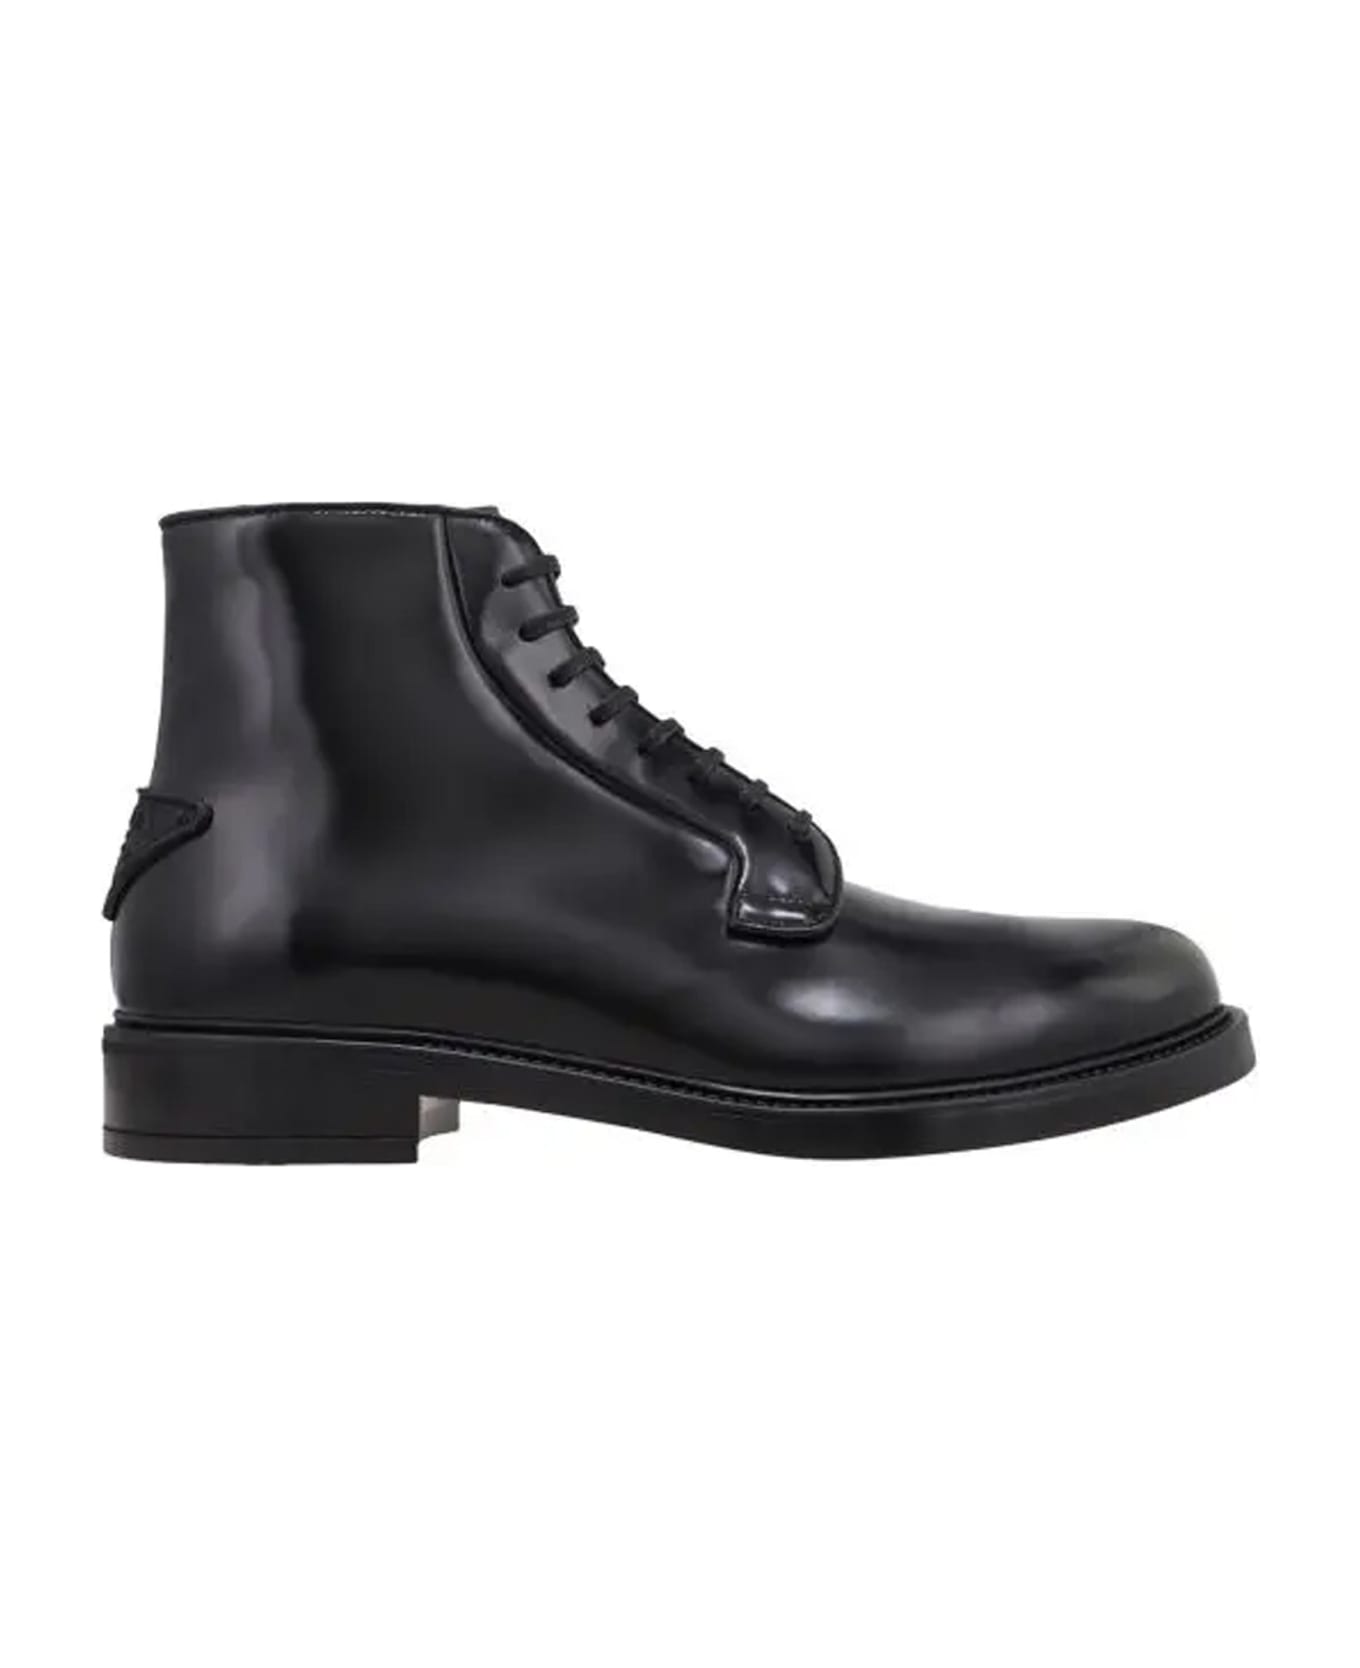 Prada Leather Lace-up Boots - Black ブーツ